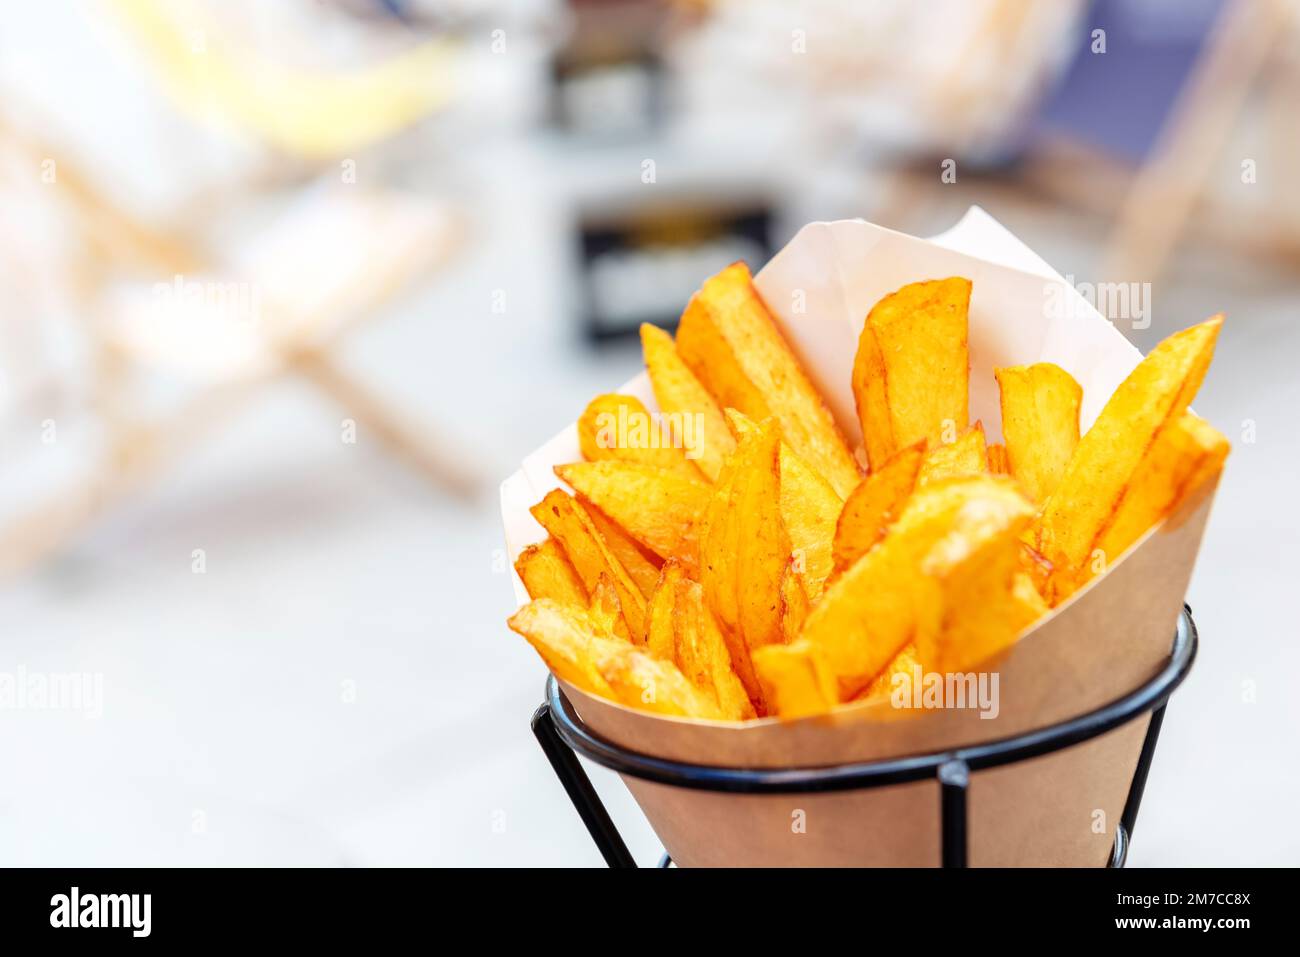 Oven baked potato wedges with sea salt and herbs. fries in a recyclable paper bag on a blurred street background, popular fast street food Stock Photo